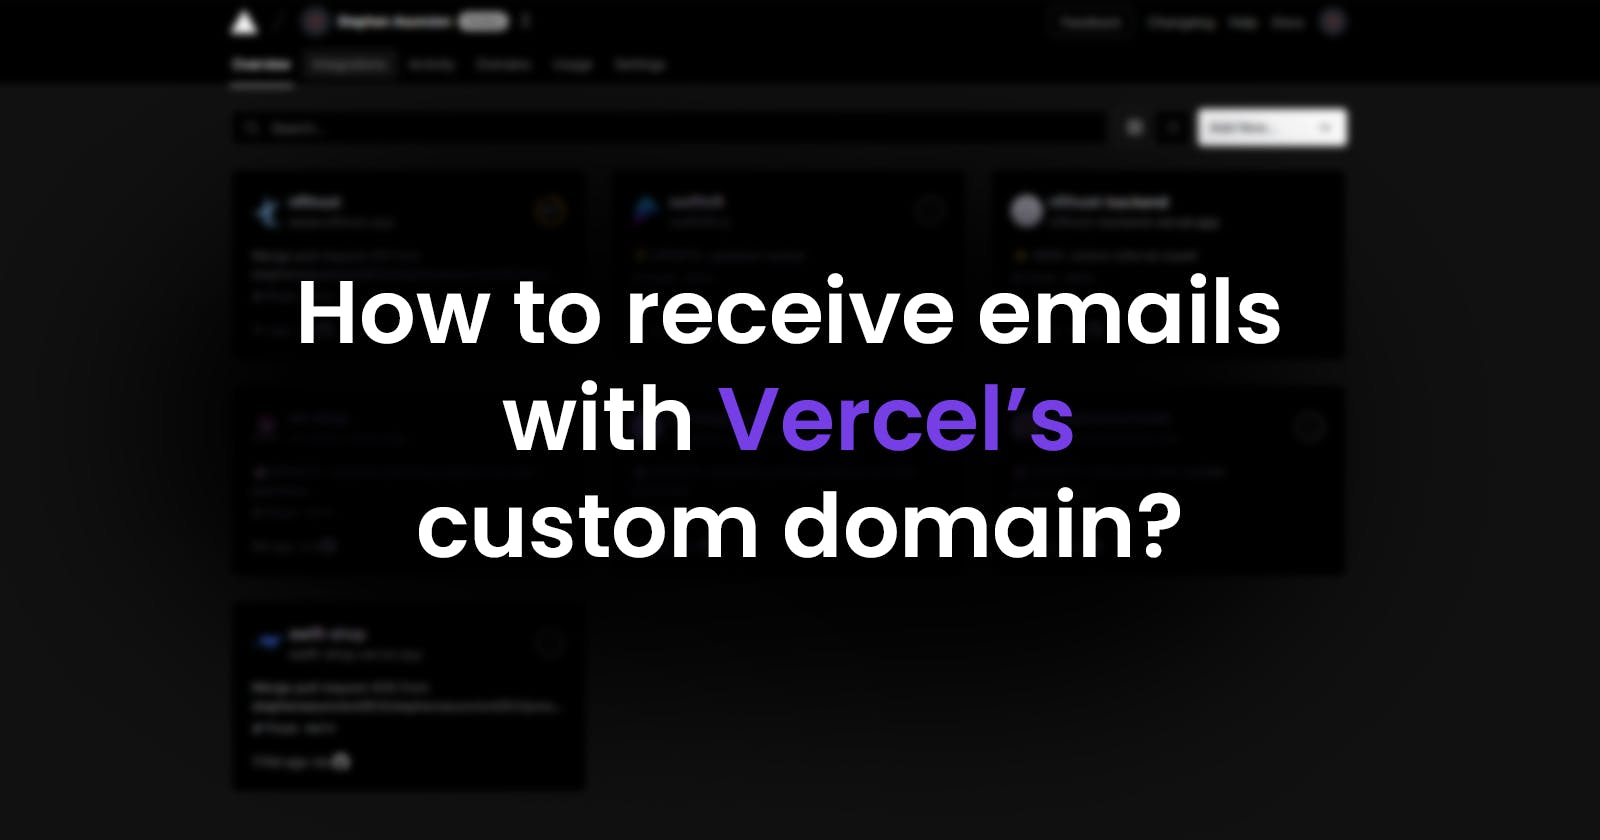 How to receive emails with Vercel’s custom domain?